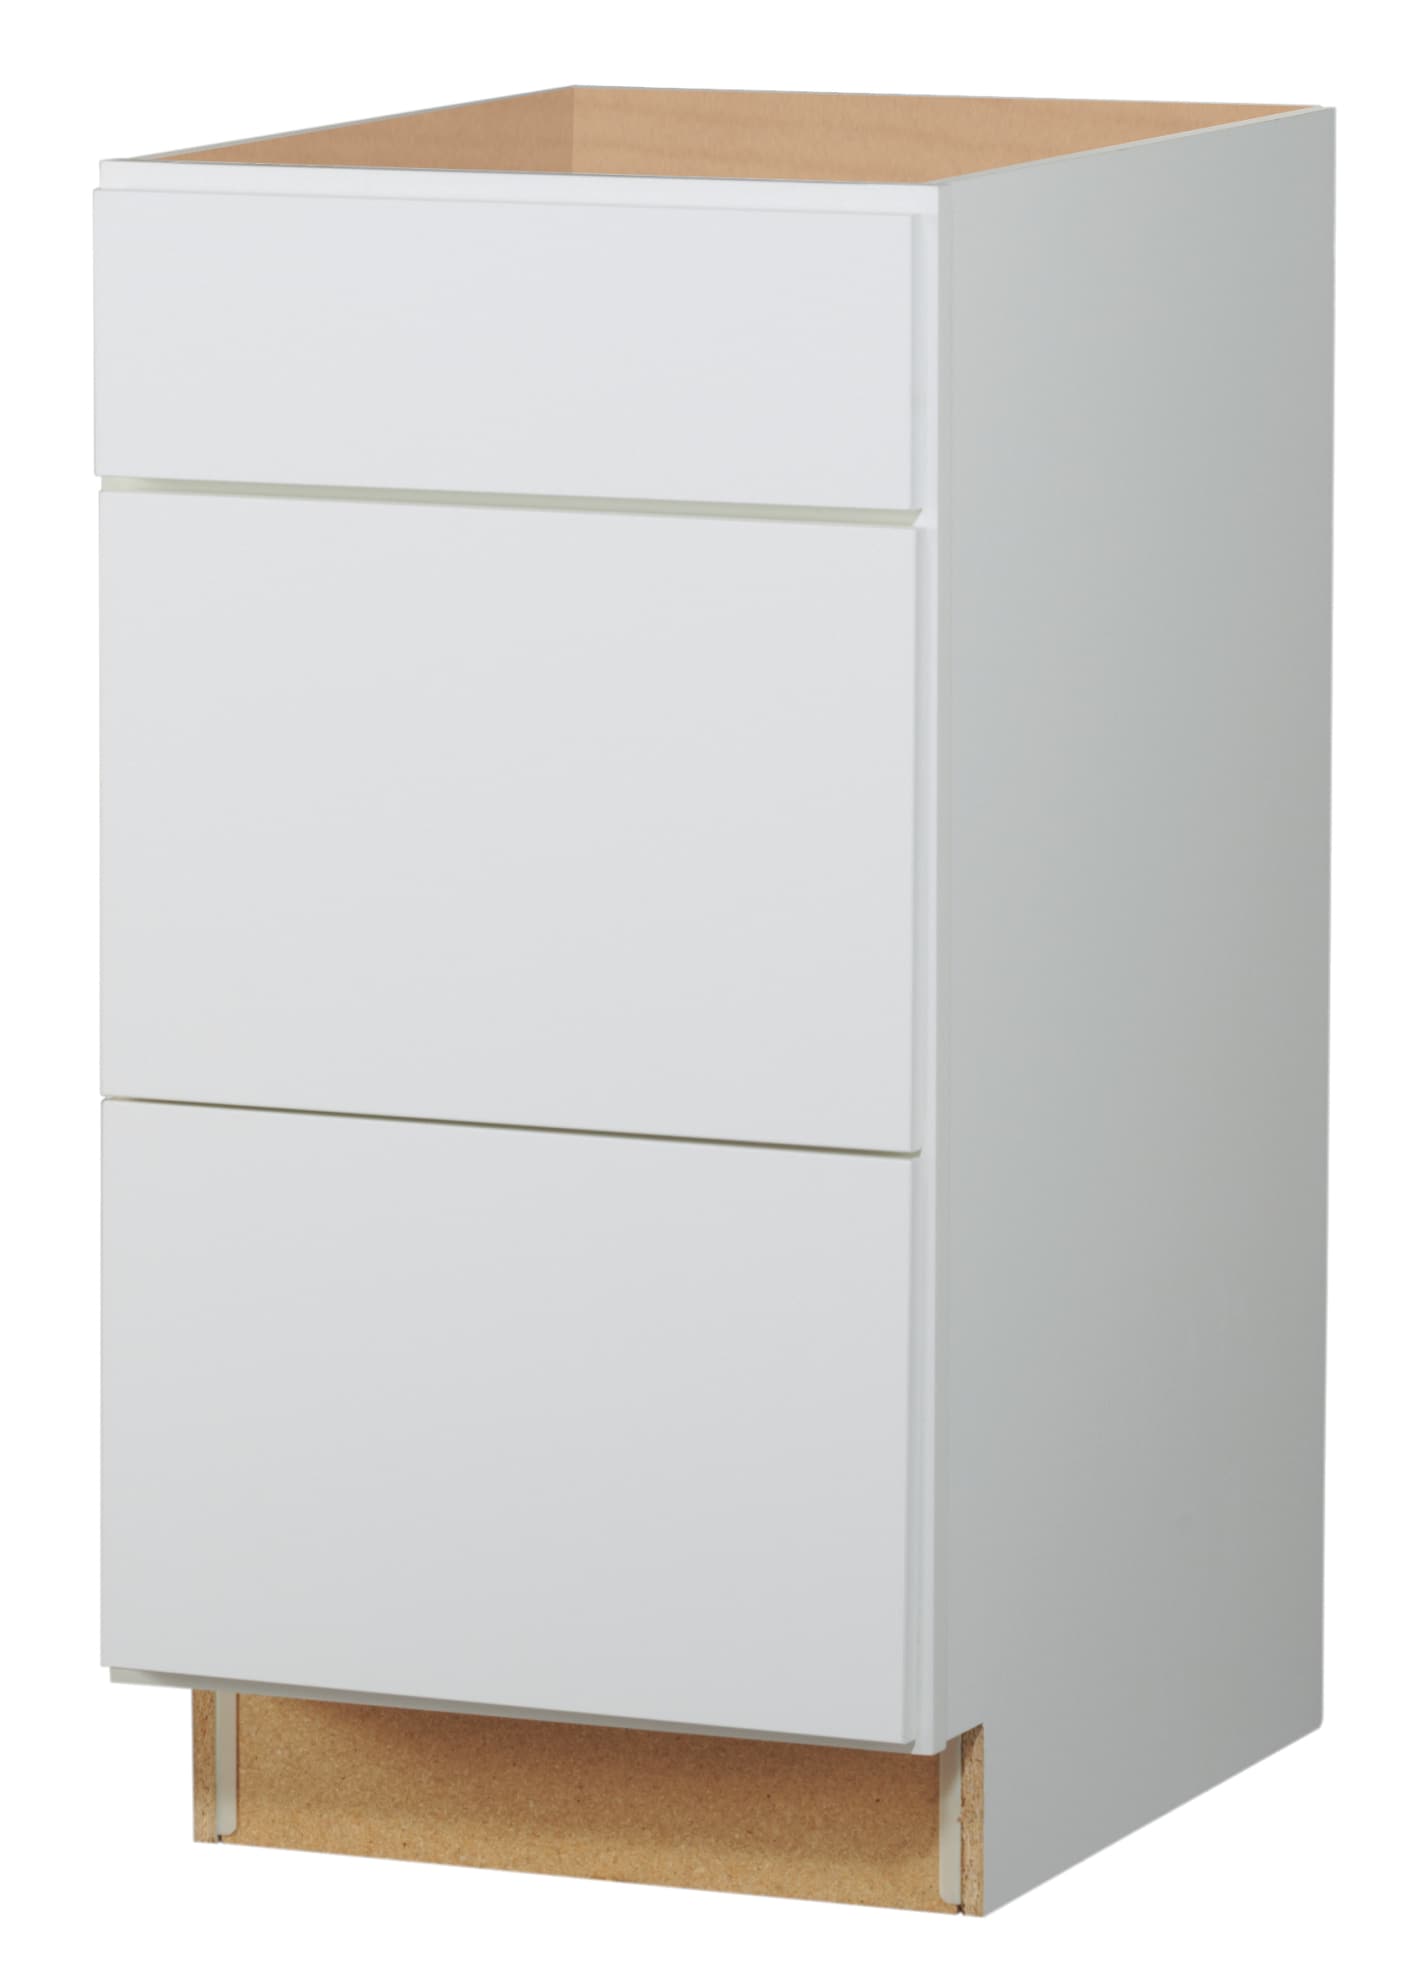 Diamond Now Arcadia 18 In W X 35 H 23 75 D White Drawer Base Fully Assembled Cabinet Recessed Panel Shaker Door Style The Kitchen Cabinets Department At Lowes Com